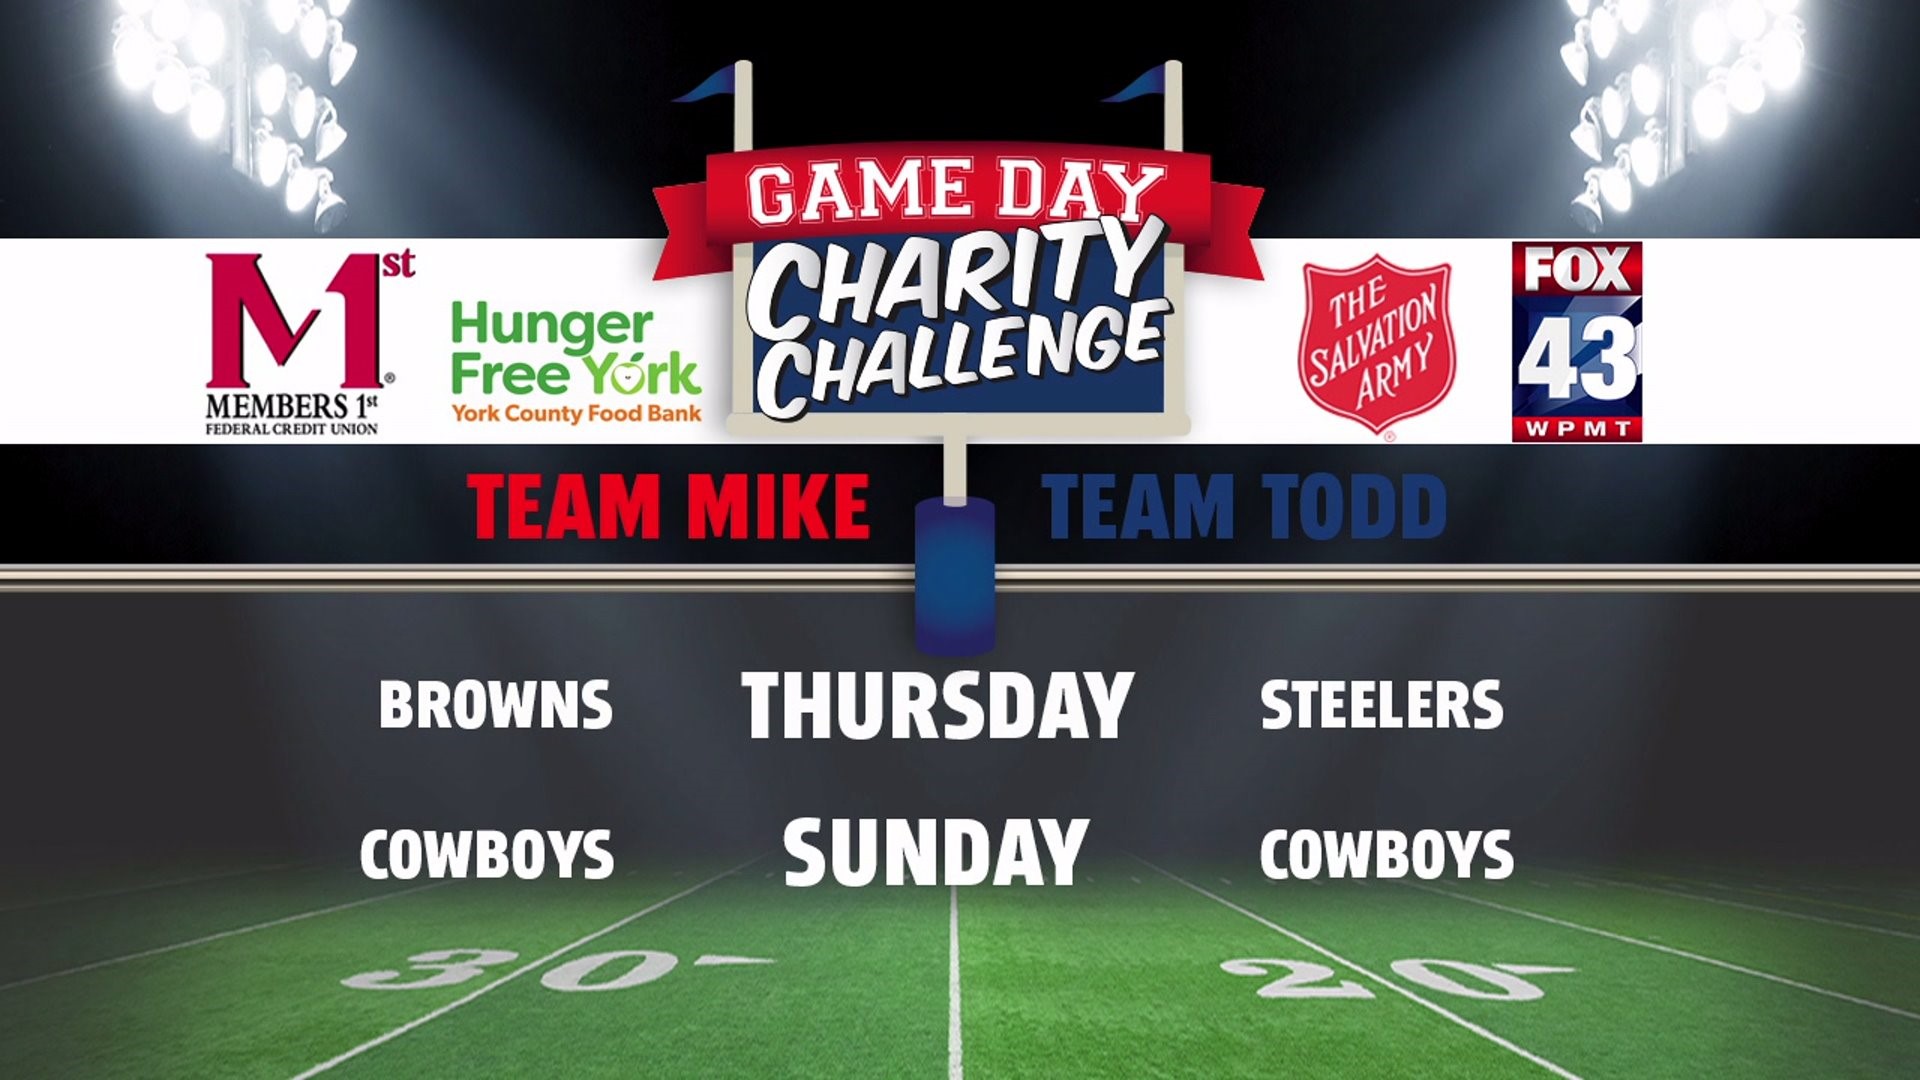 Game Day Charity Challenge (Week 8)